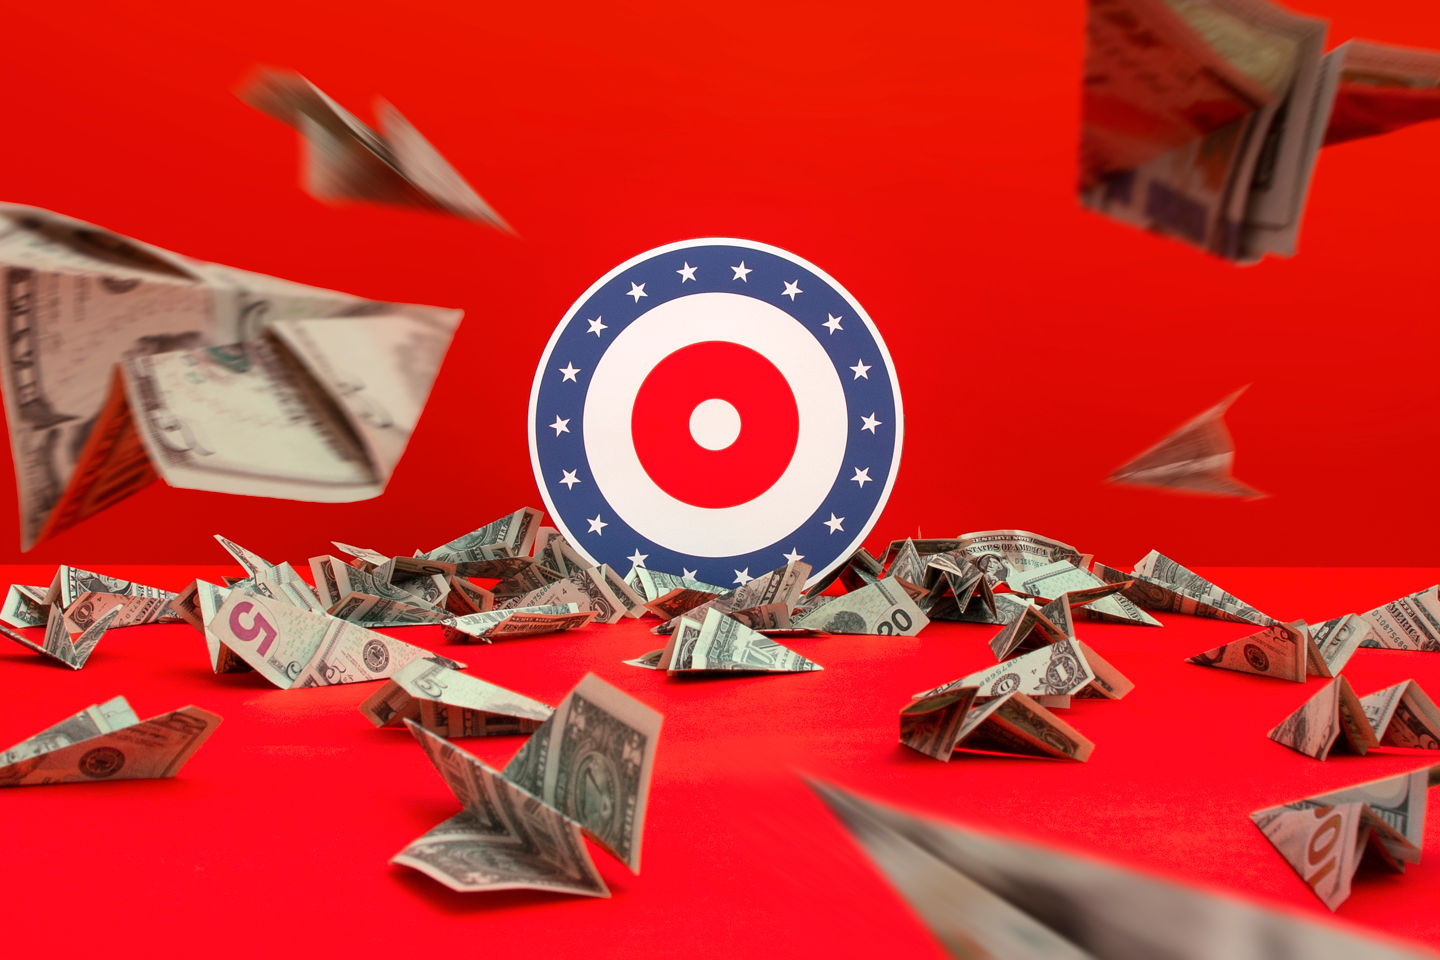 Dollar bills being folded into paper airplanes and thrown at a target.